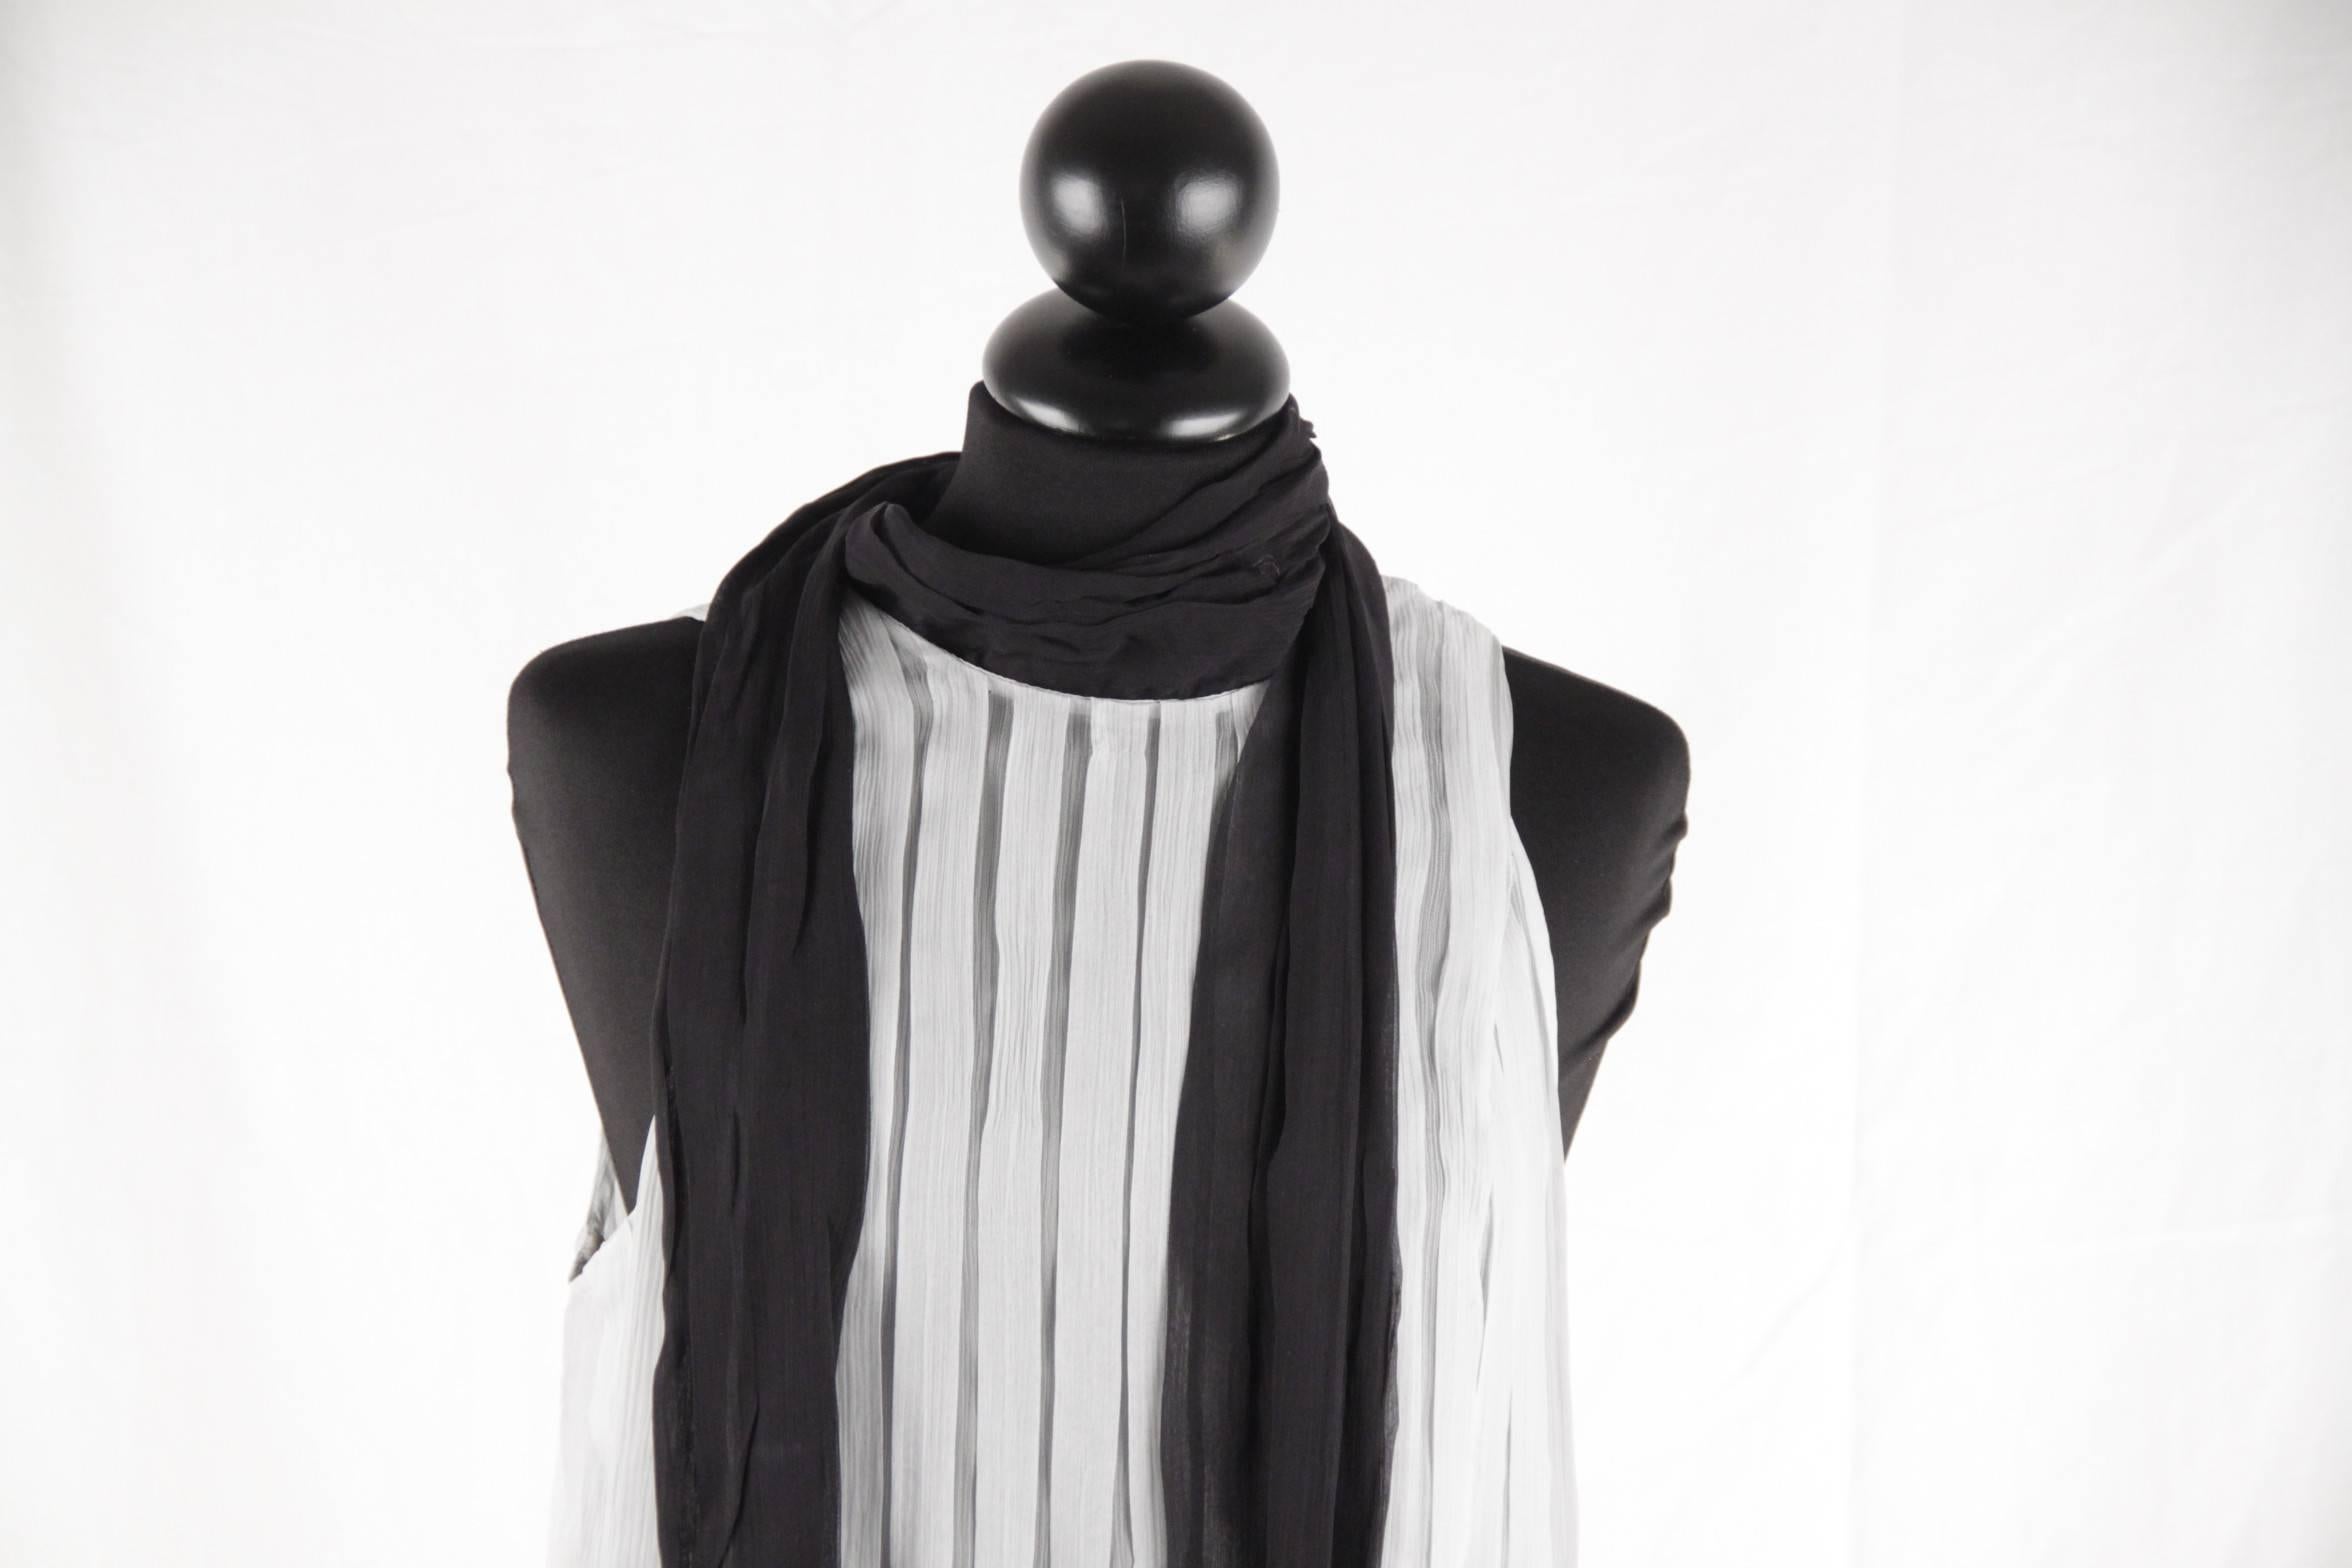 

- Composition: 100% Silk

- Baby blue/Light Gray sheer fabric

- Black contrast self-tie scarf on the neckline

- Side zip and hook and eye closure

- Allover box pleating

- Size: 38 (The size shown for this item is the size indicated